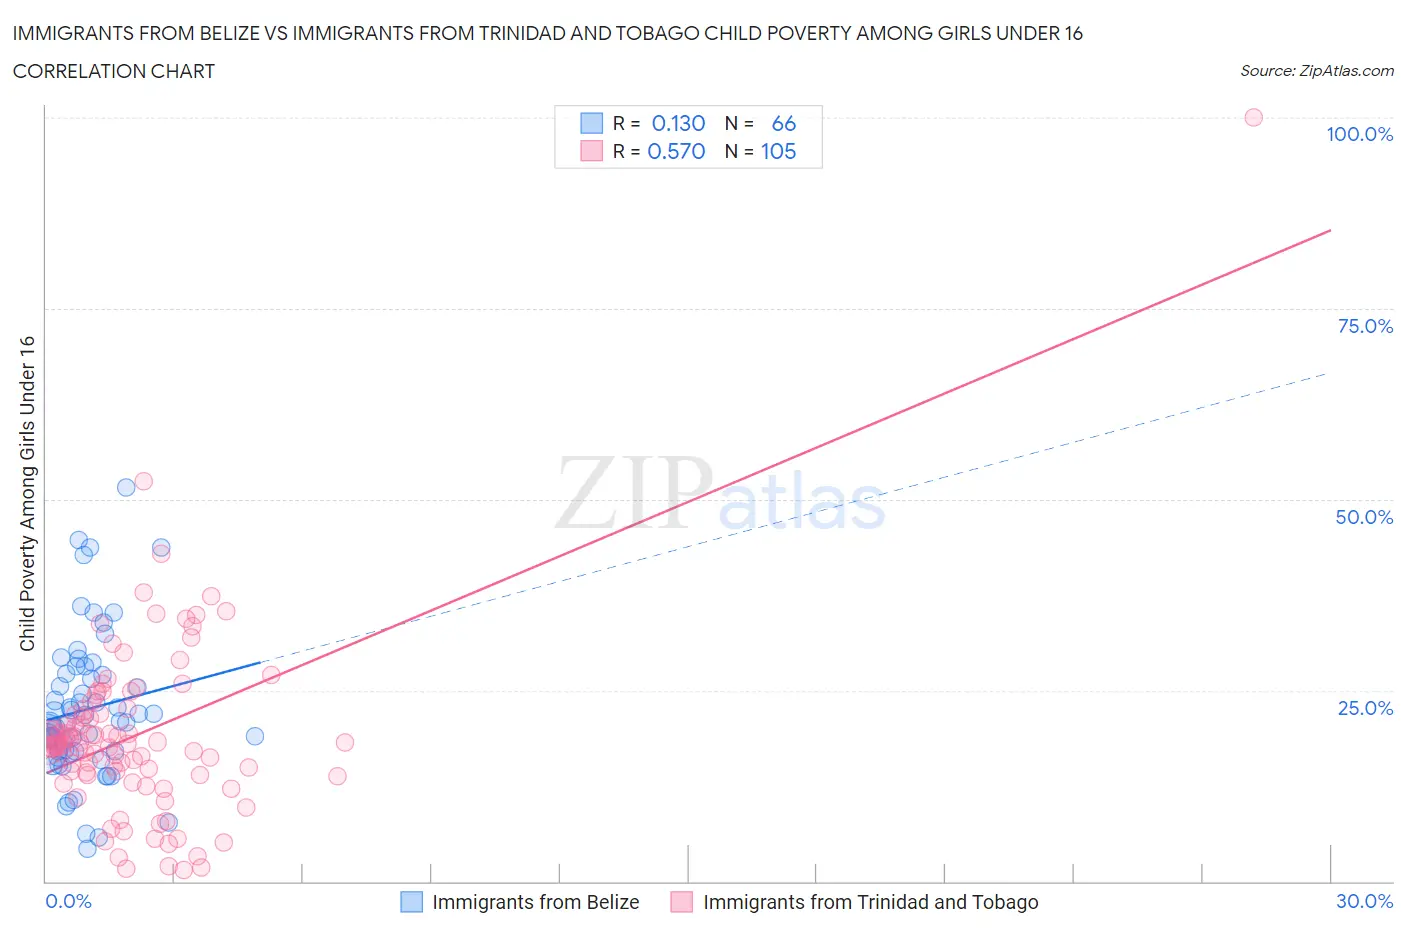 Immigrants from Belize vs Immigrants from Trinidad and Tobago Child Poverty Among Girls Under 16